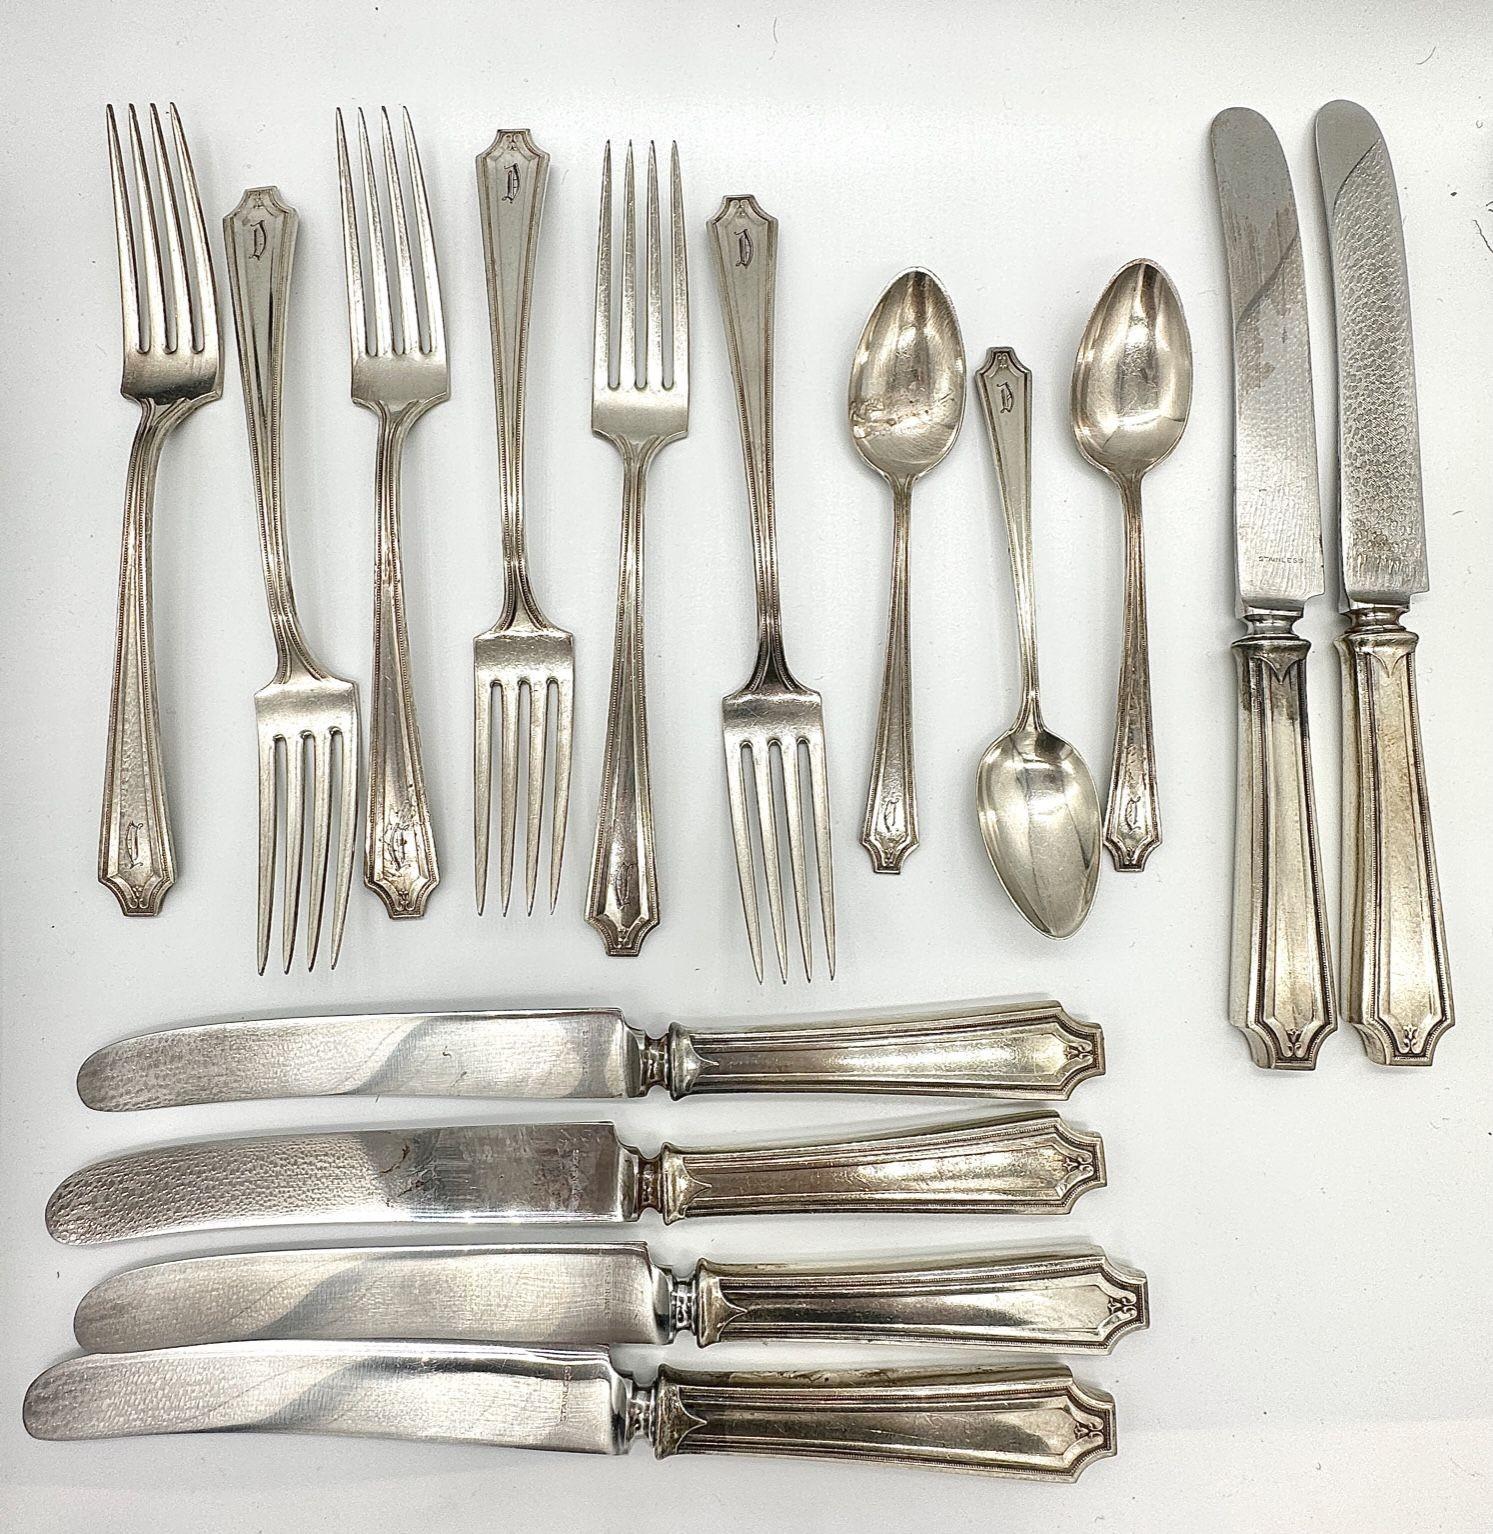 Old French King Albert Sterling Silverware Set of 15 by Whiting Manf Co 1